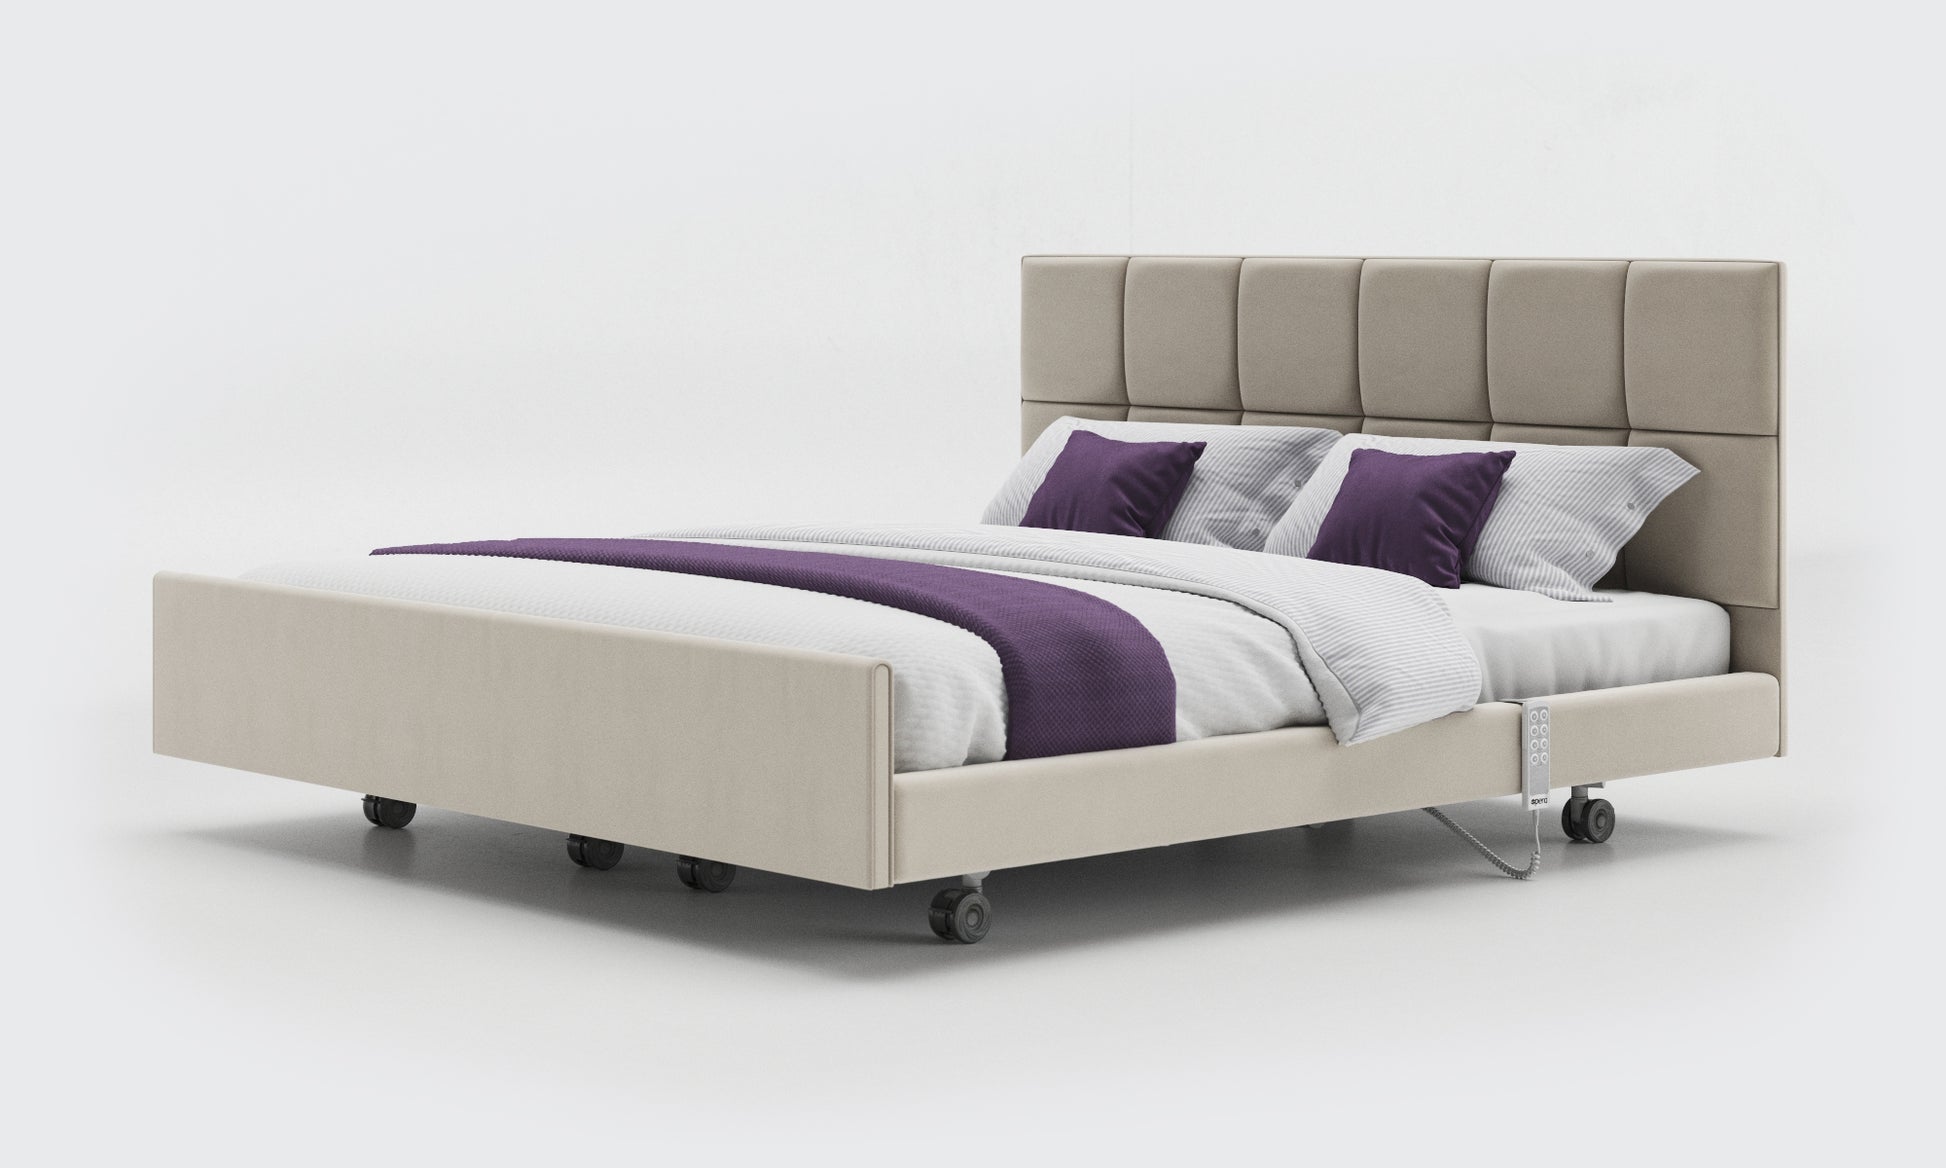 Sisal Leather Signature Comfort Dual Profiling Bed With an Opal Headboard